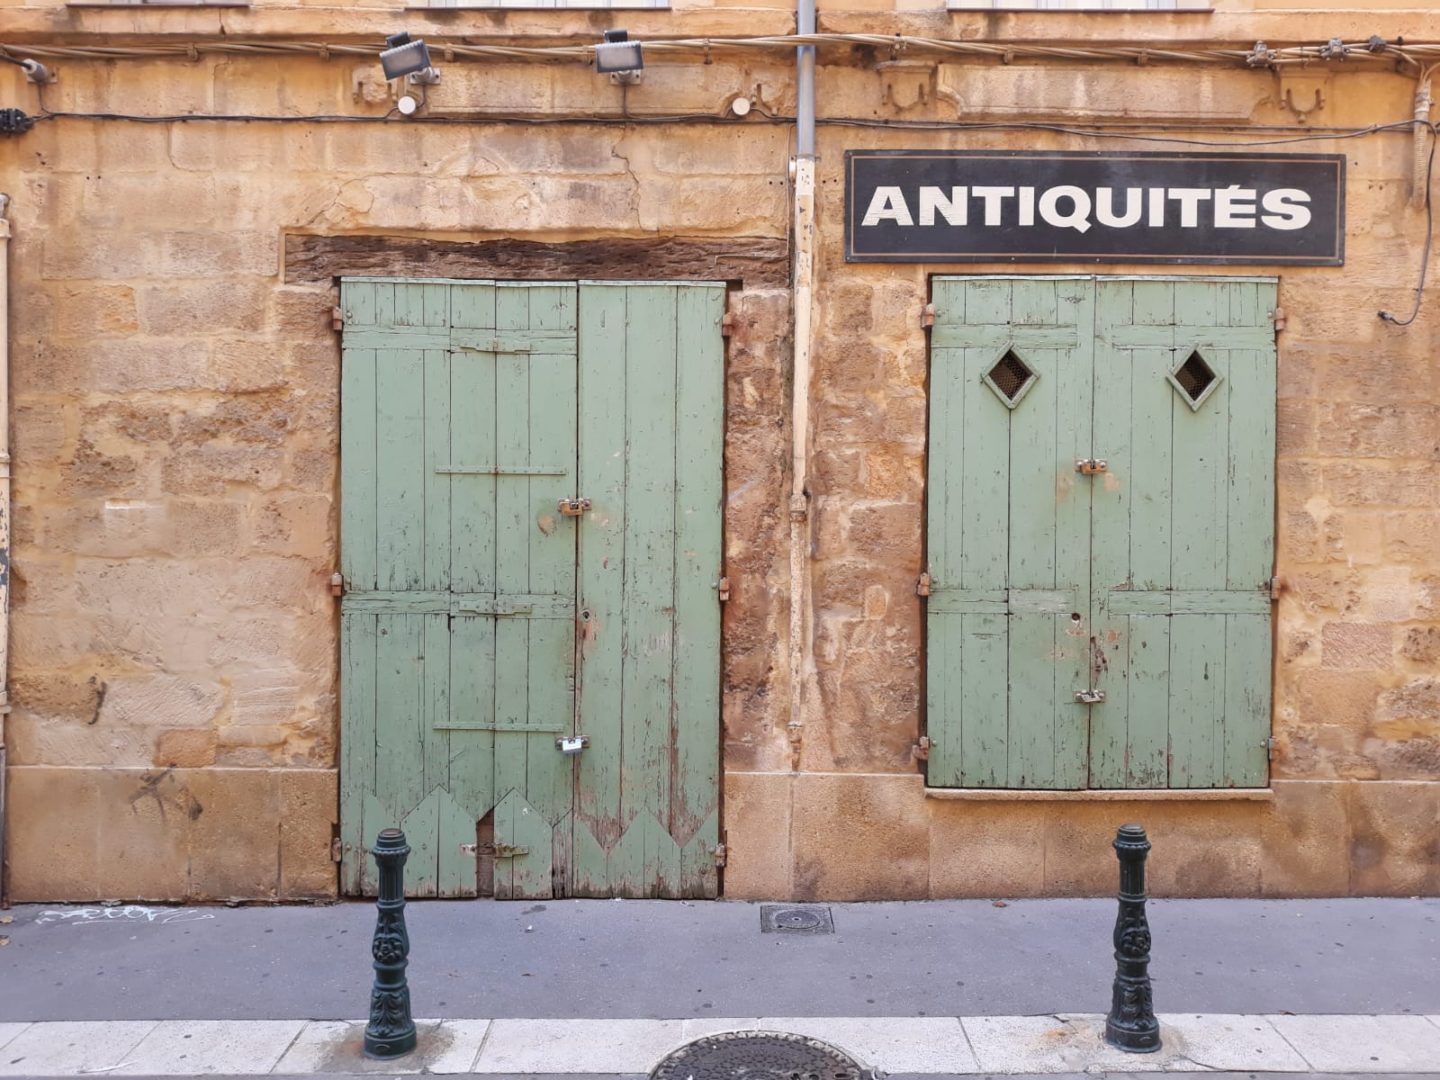 Streets of Marseilles, an antiques store